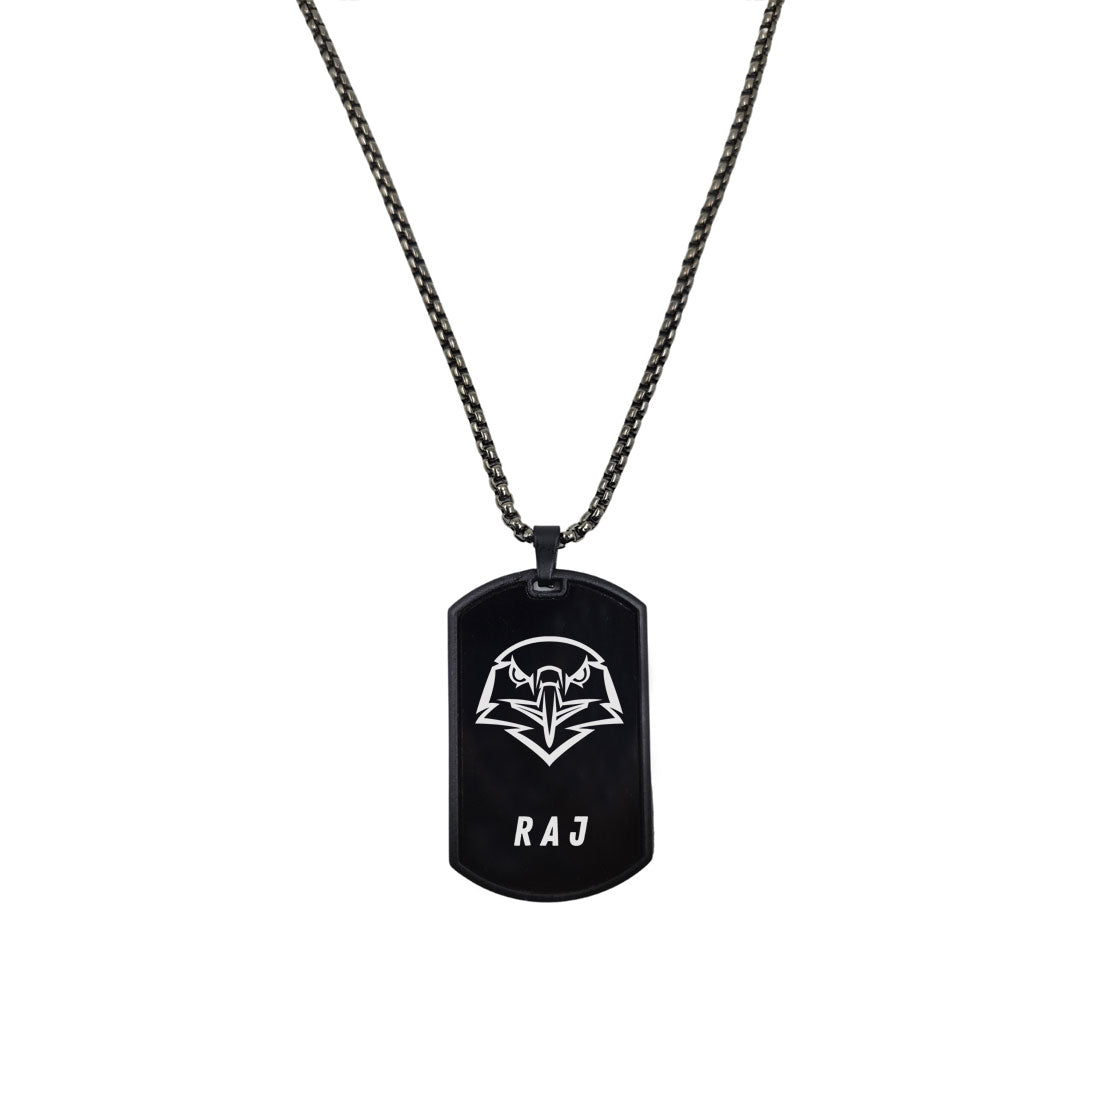 Buy COOLSTEELANDBEYOND Classic Bronze Two-Pieces Mens Military Army Dog Tag  Pendant Necklace, 28 inches Ball Chain at Amazon.in